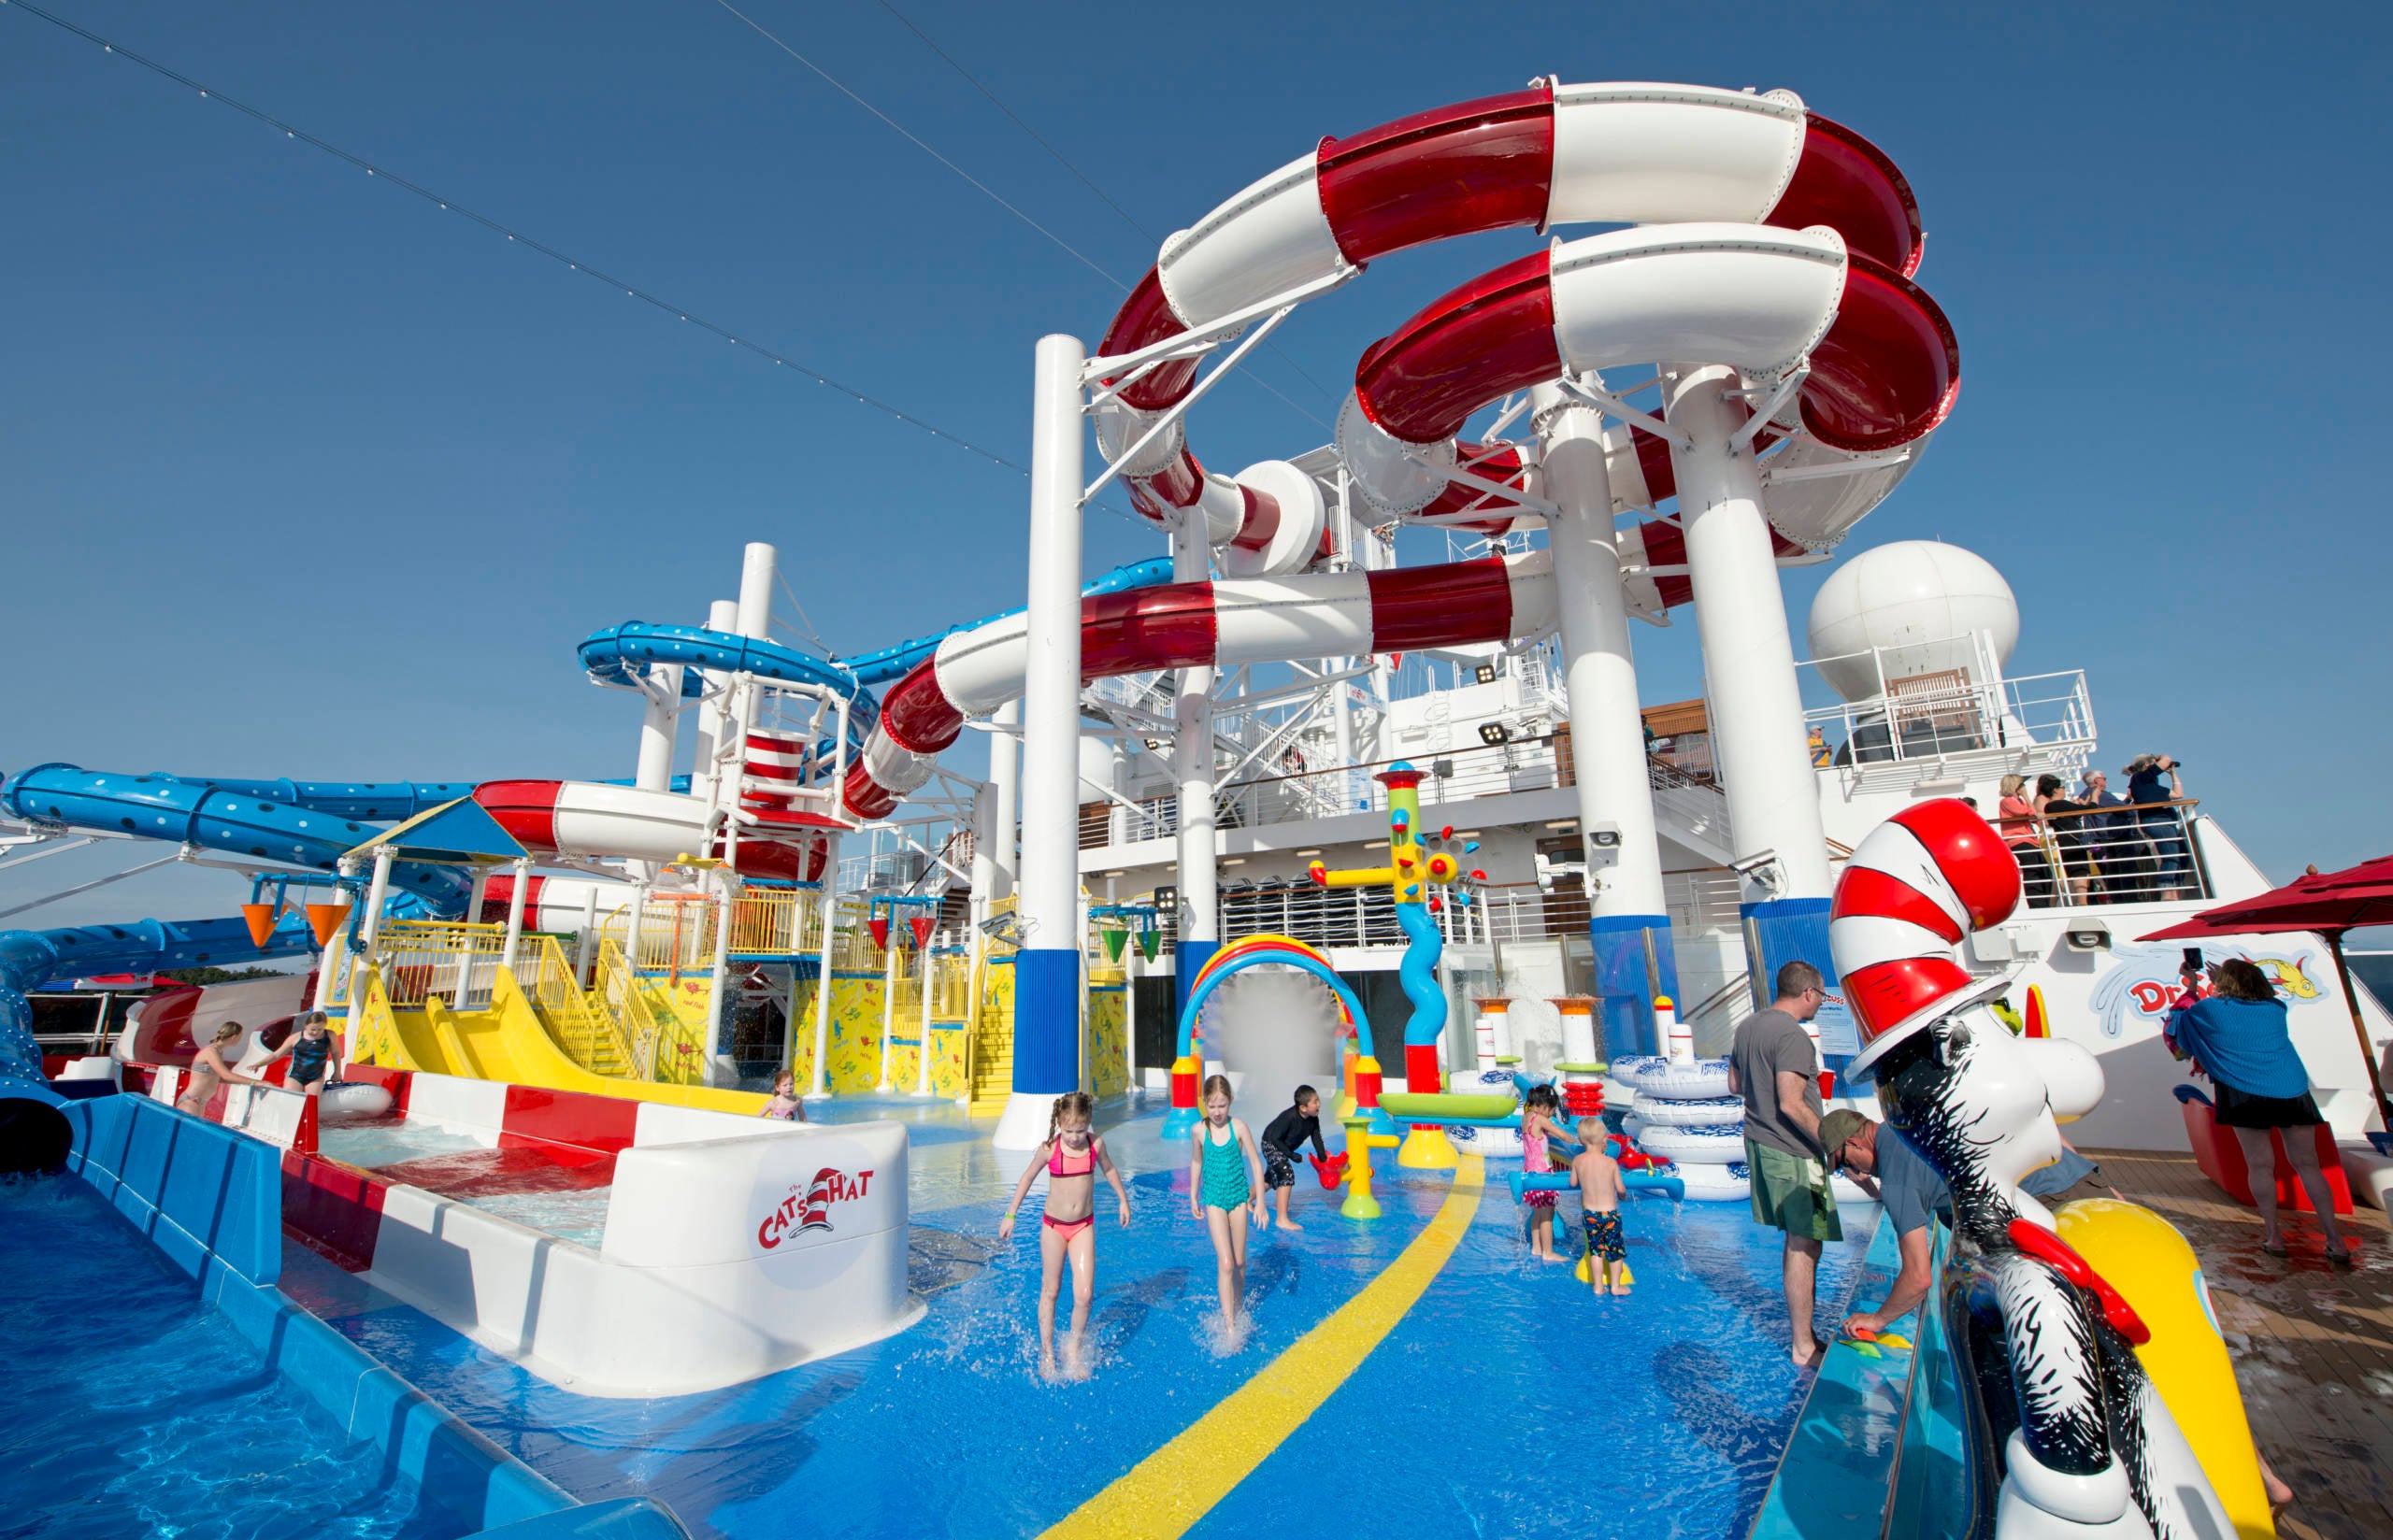 Cruise giant Carnival in 2018 added a Dr. Seuss-themed waterpark to the top of its